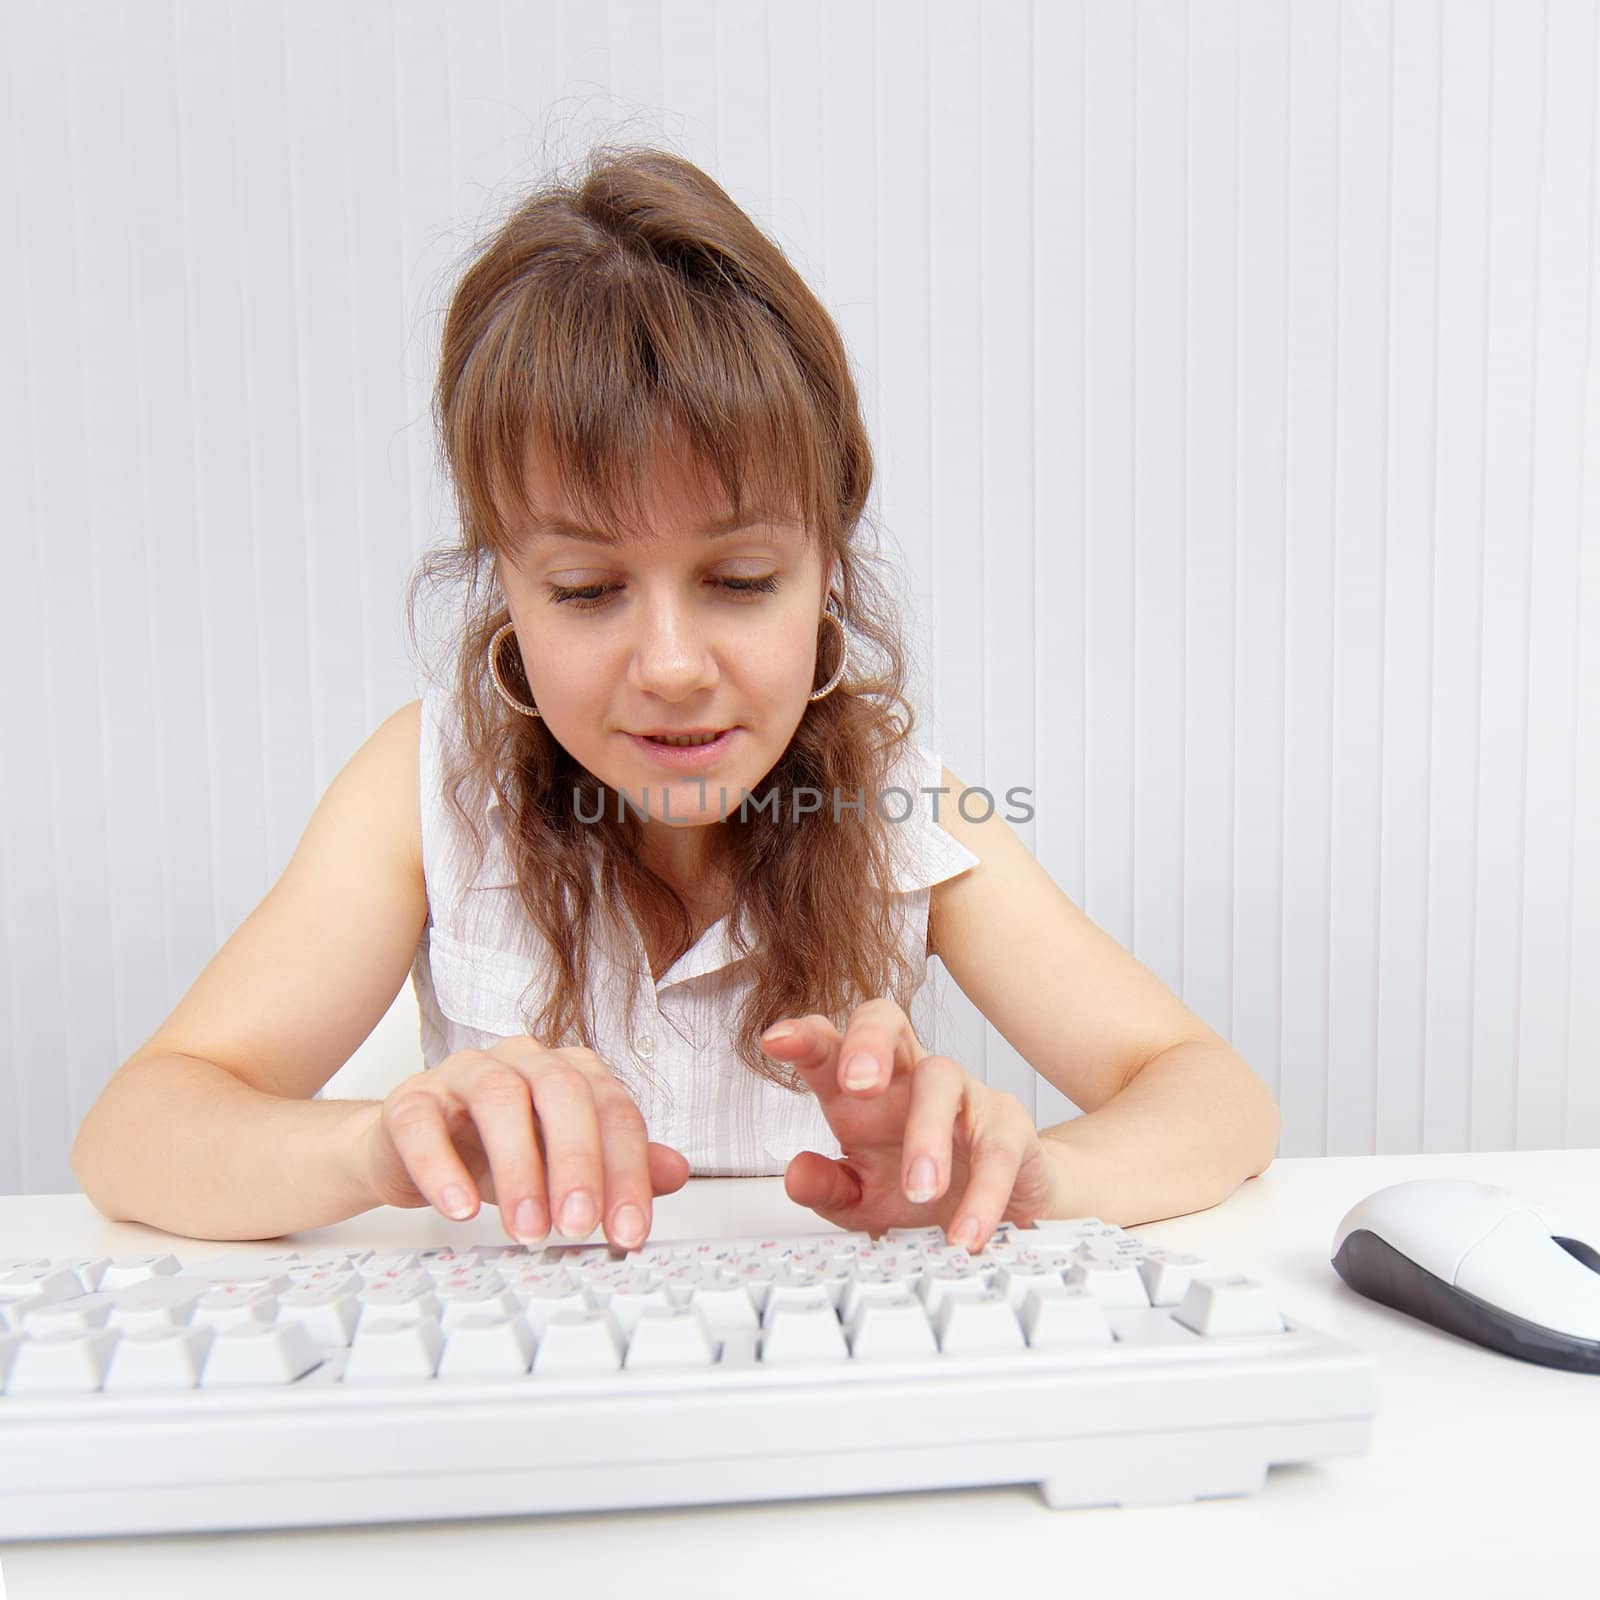 A woman to work with the computer keyboard by pzaxe